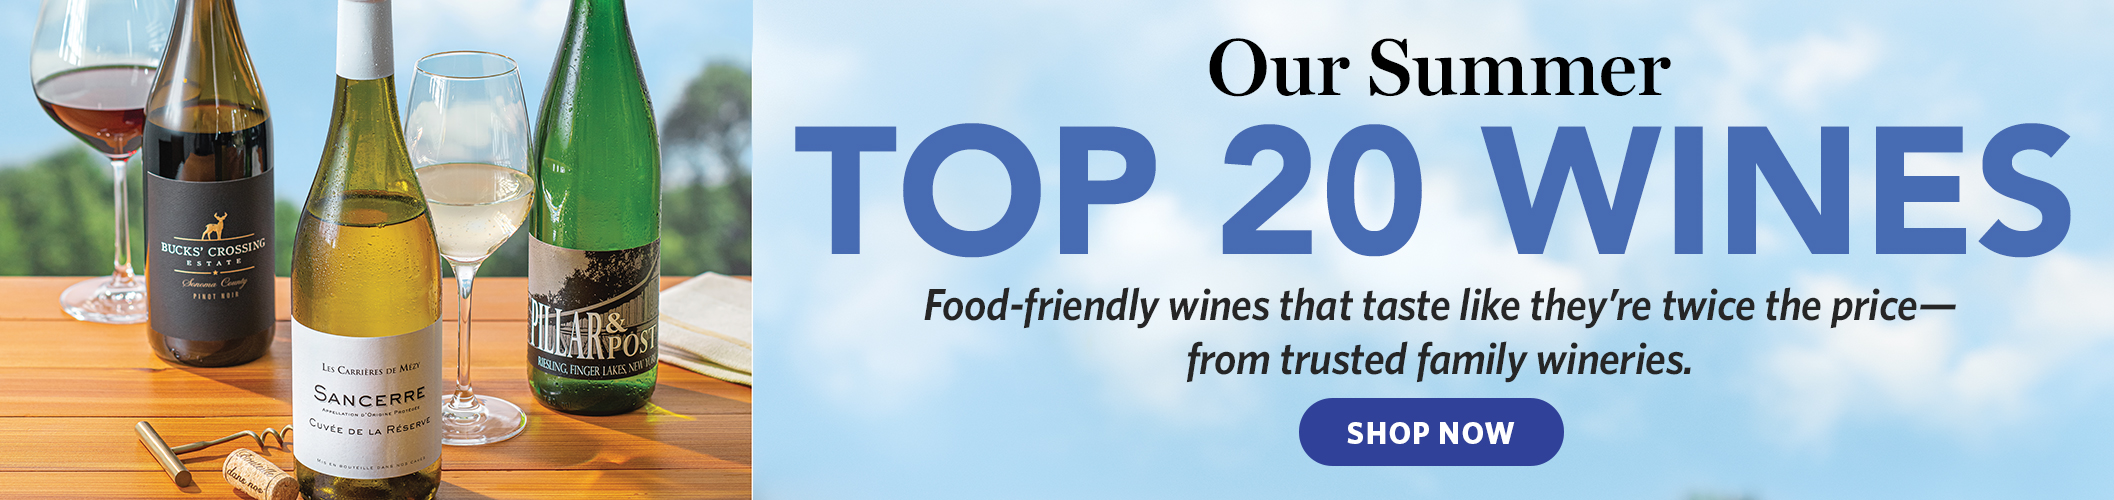 Our Summer Top 20 Wines - Shop Now